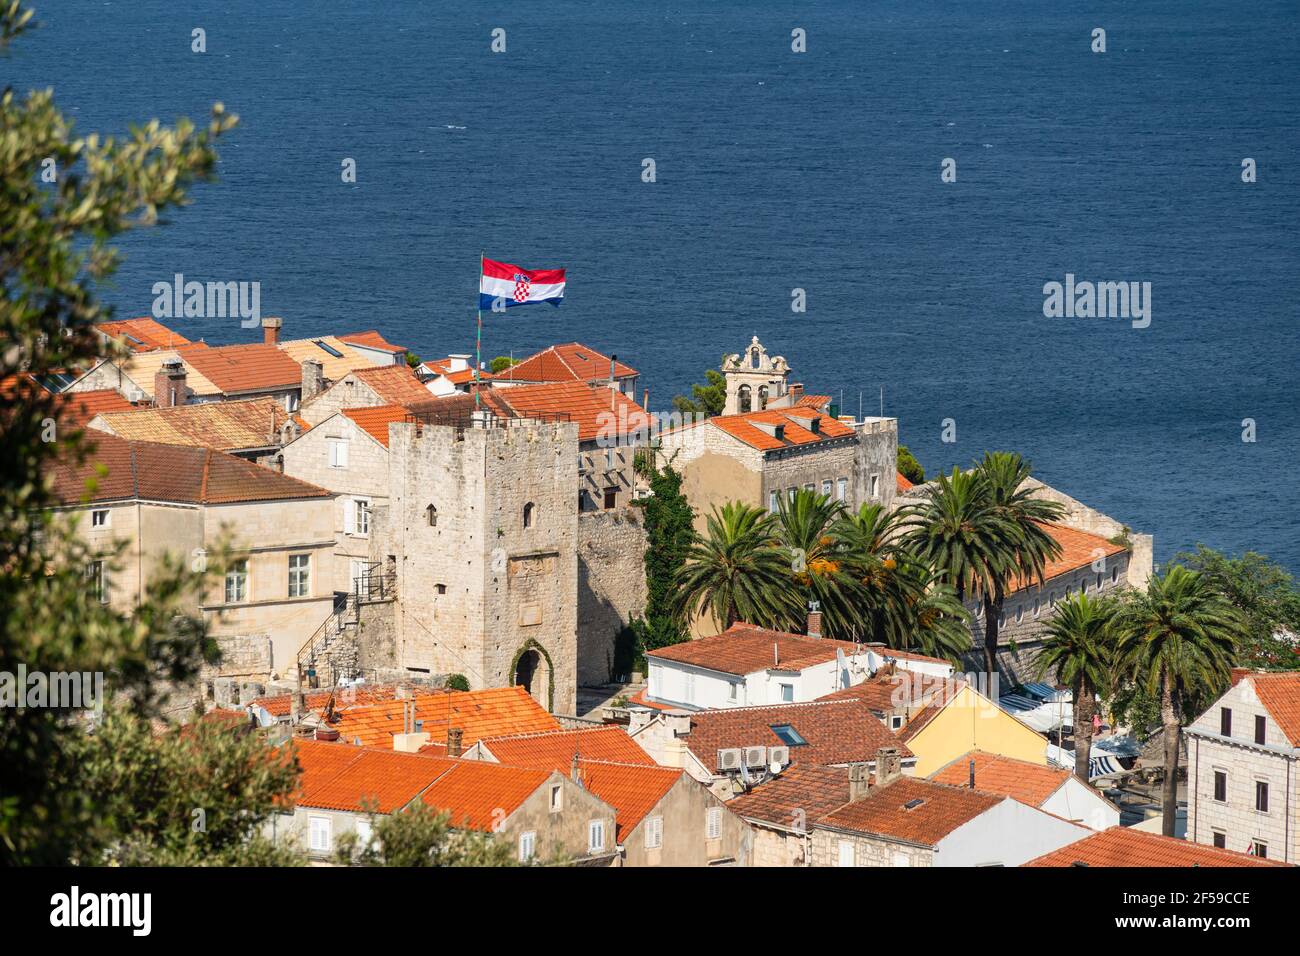 Croatian flag flying above the main Town Gate in Korcula medieval old town in Croatia Stock Photo